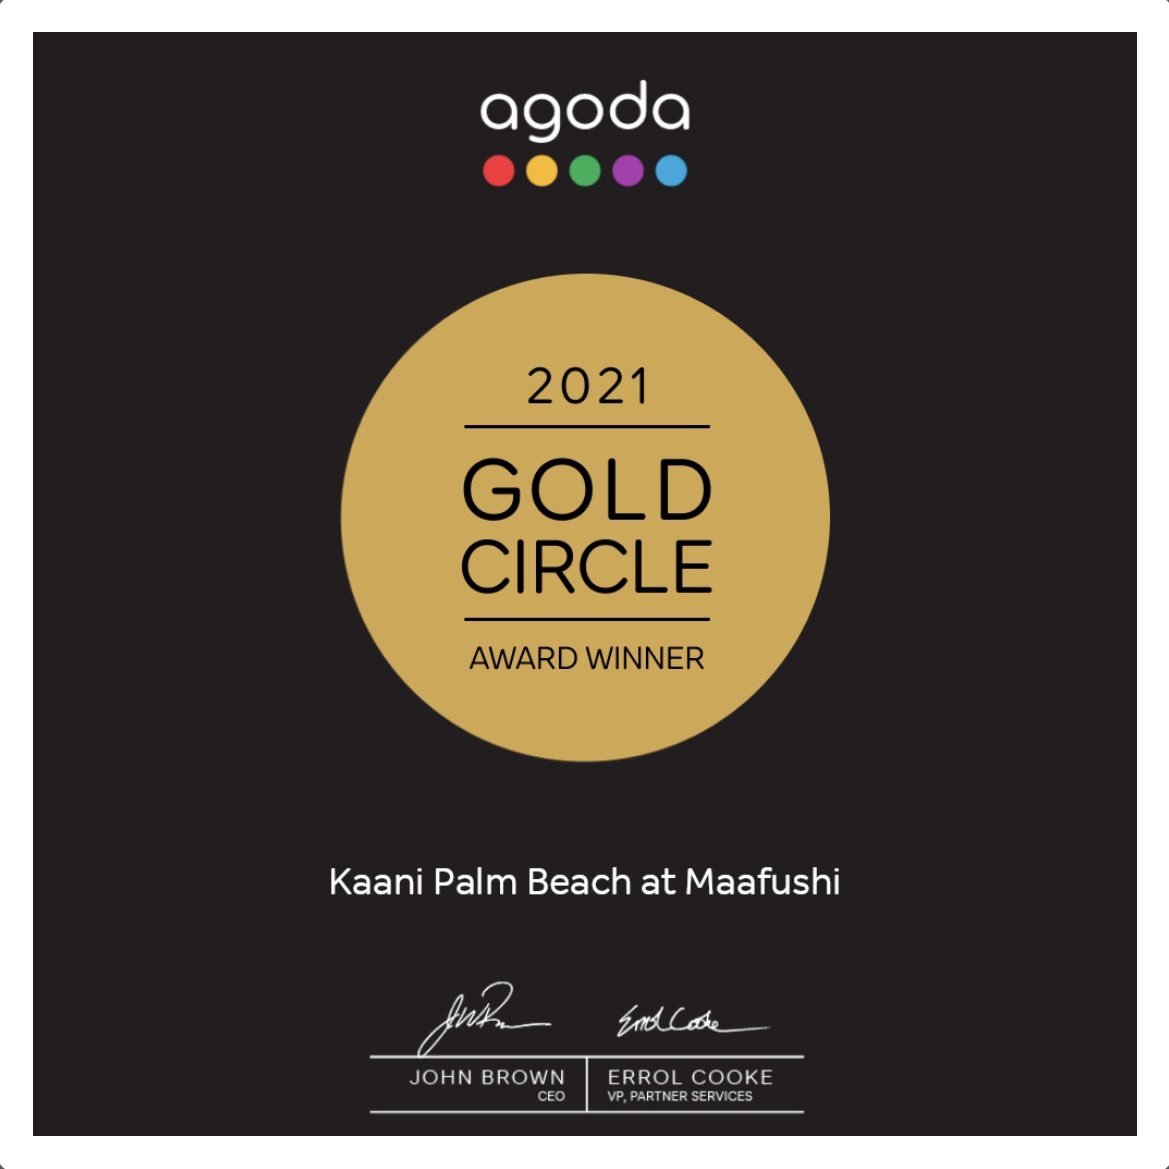 Kaani Palm Beach is honoured to receive the Agoda Gold Circle Award 2021, one of the top recognitions for Agoda partners. @aasisaleem @Mausoom_Maus @visitmaldives @imtmonline #localislandtourism